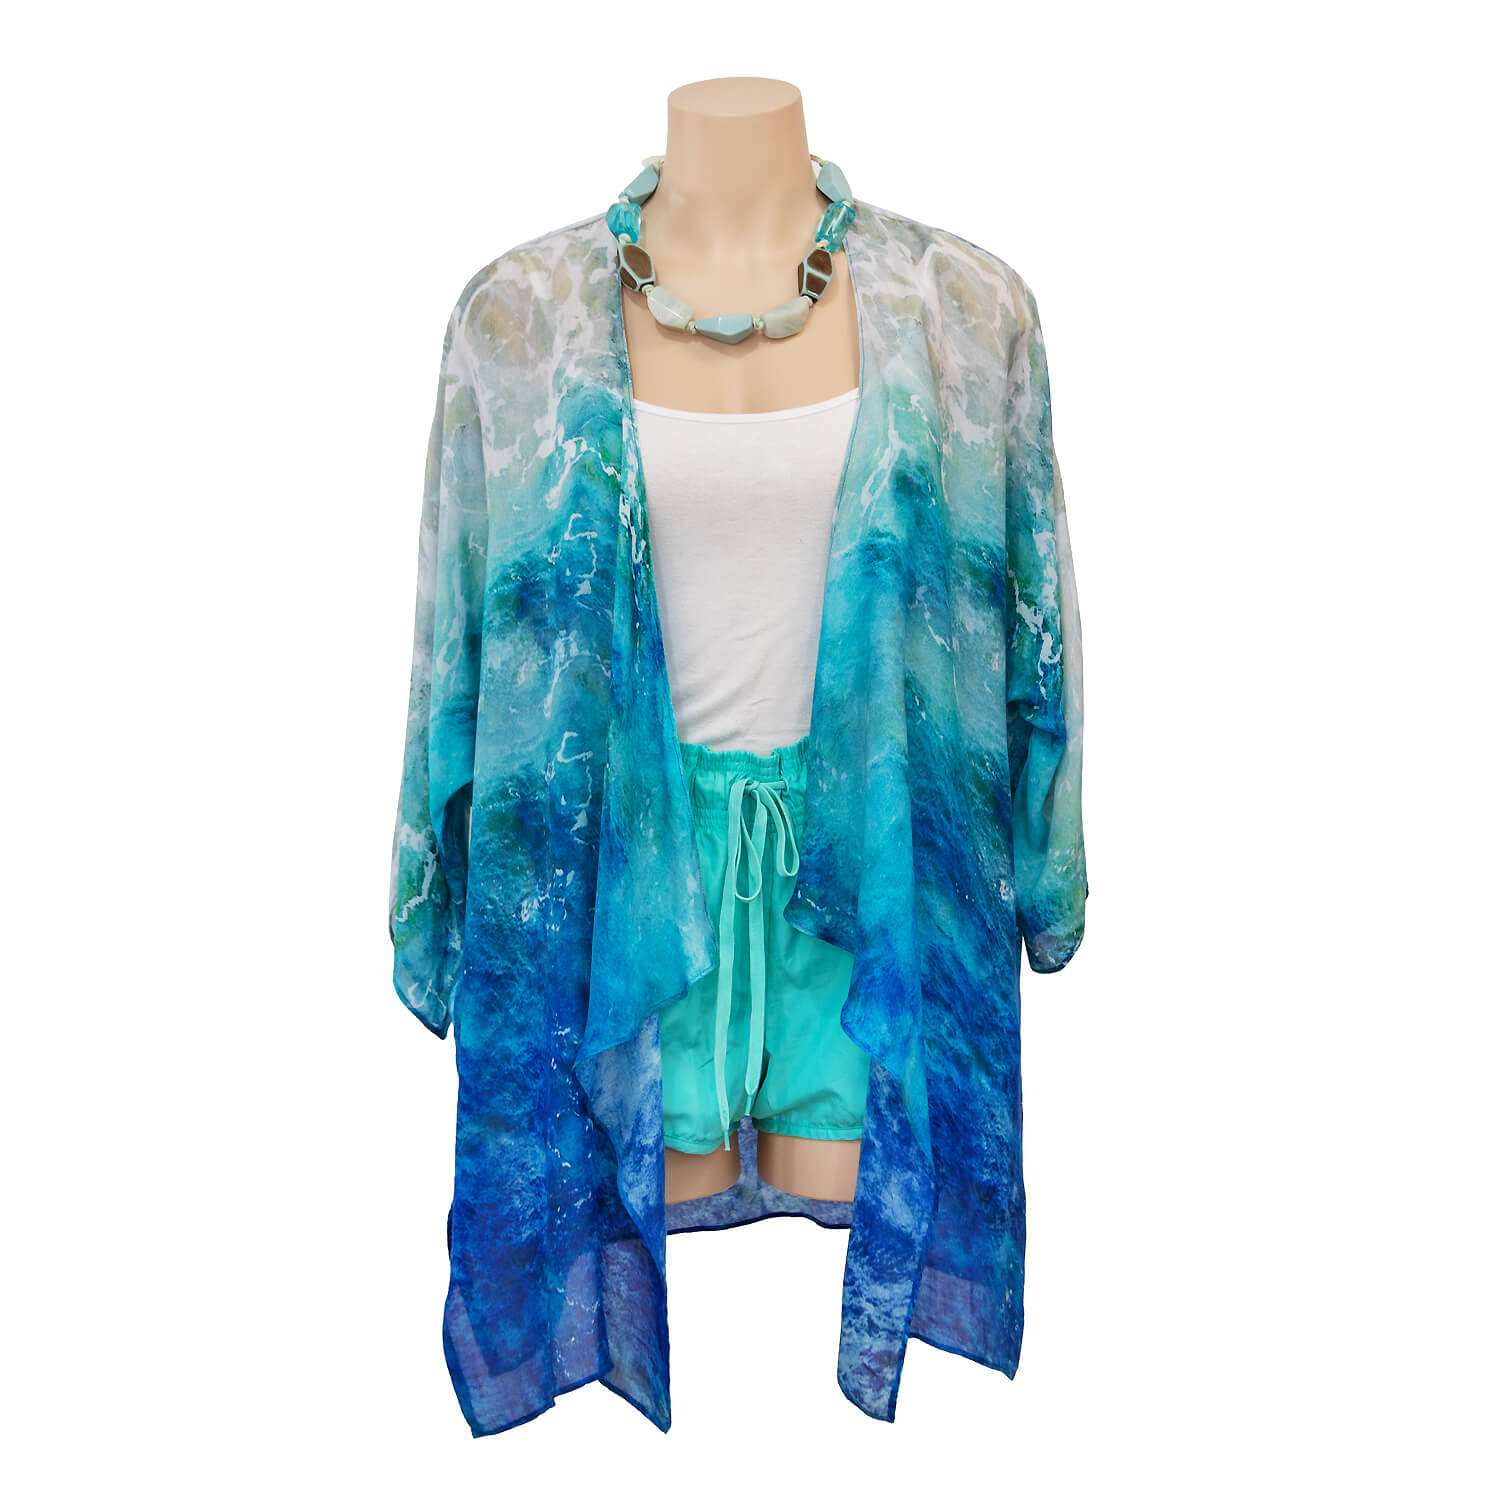 barchetta waterfall jacket coverup over white top and aqua blue shorts